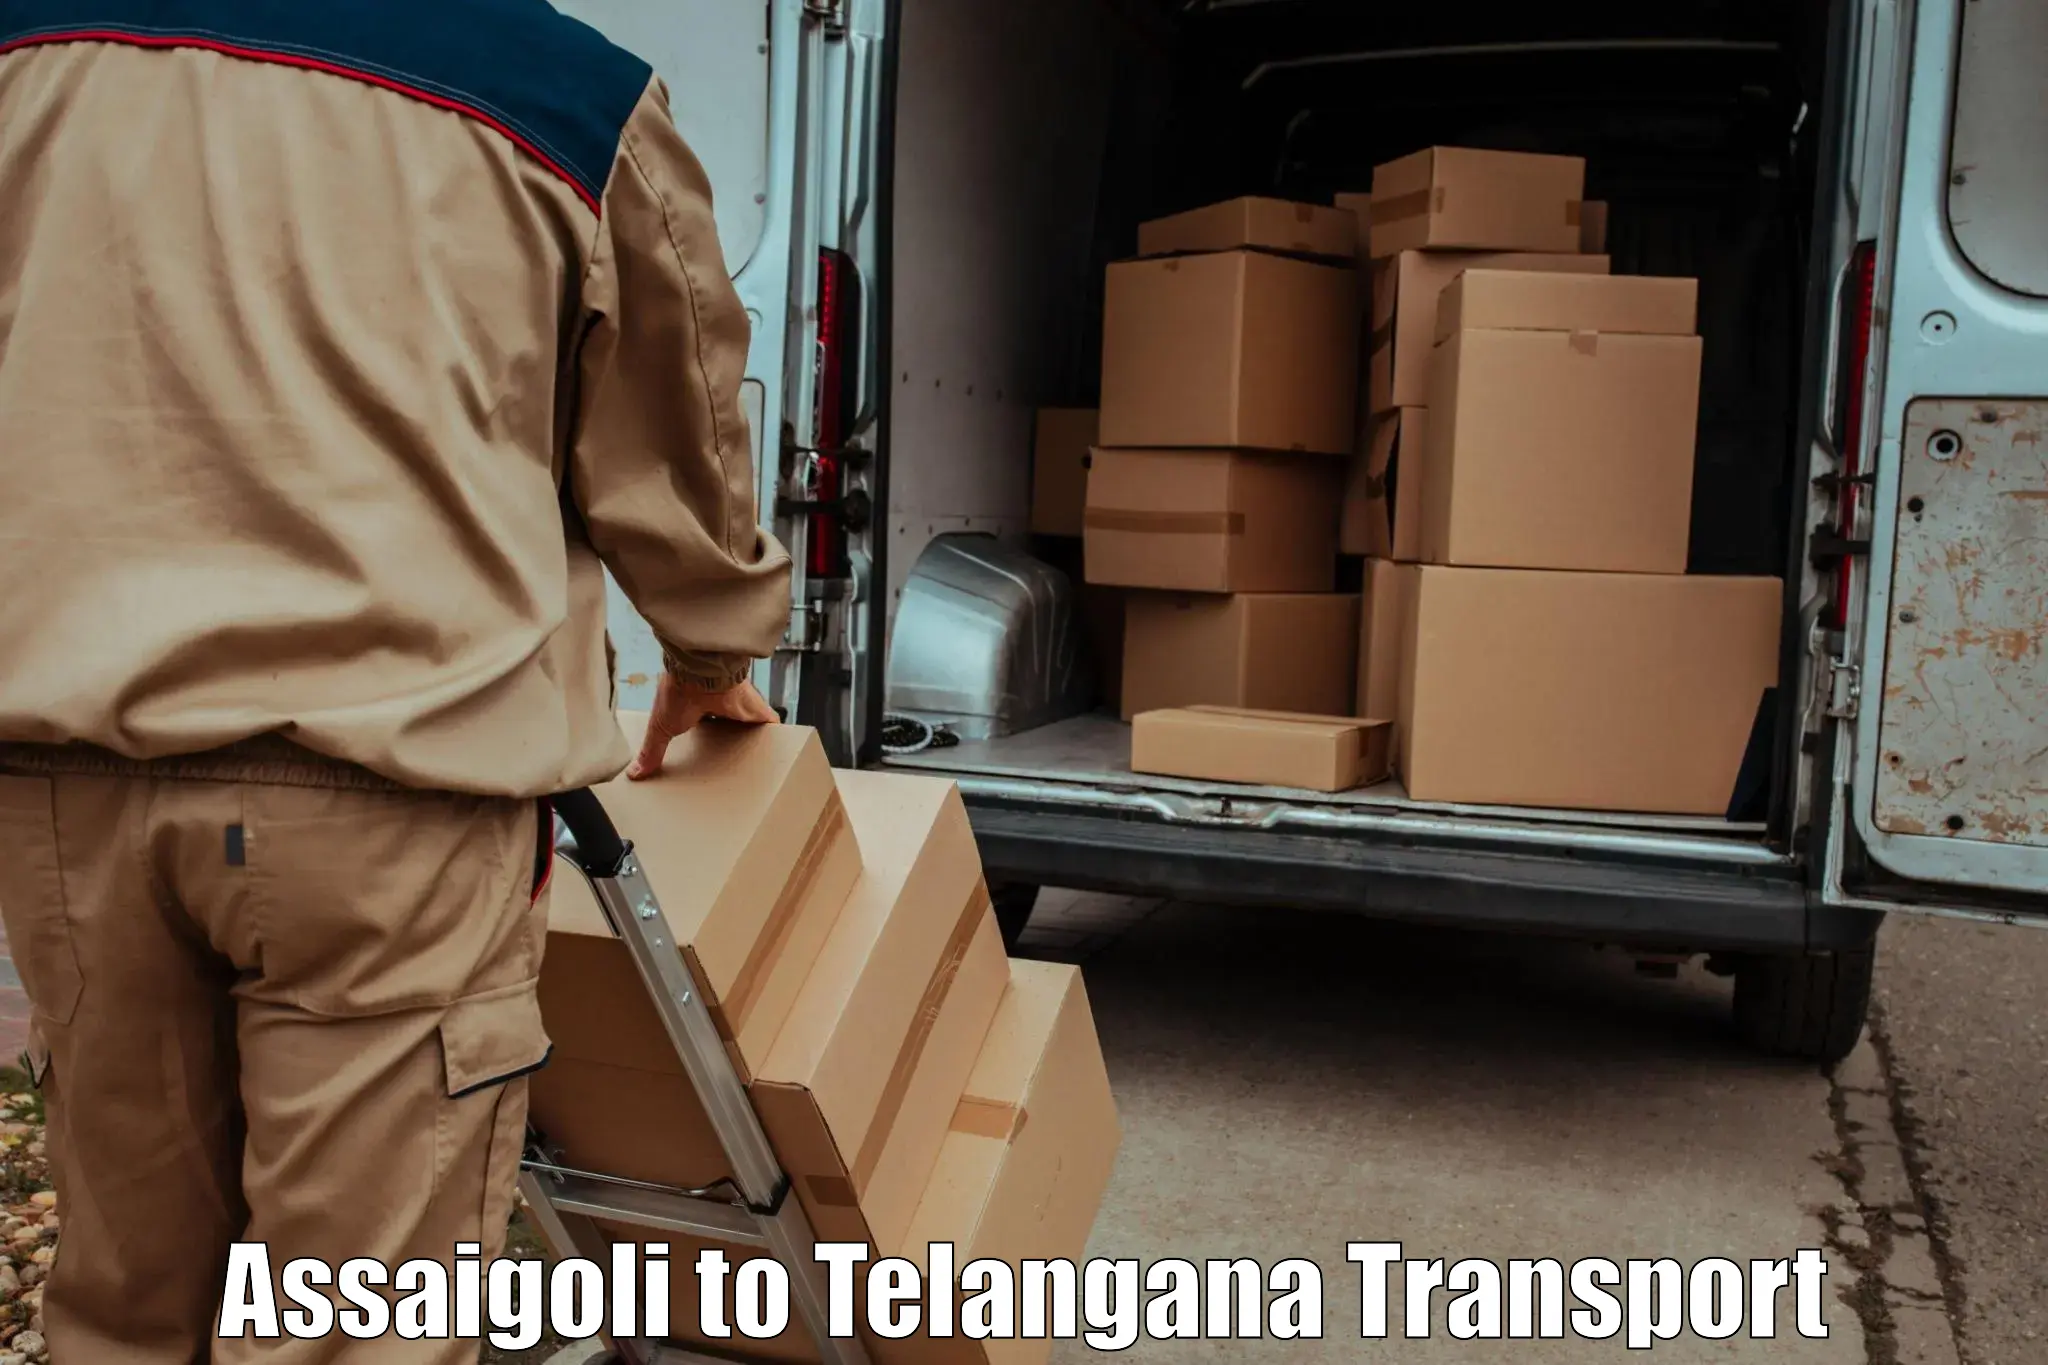 Road transport online services Assaigoli to Sultanabad